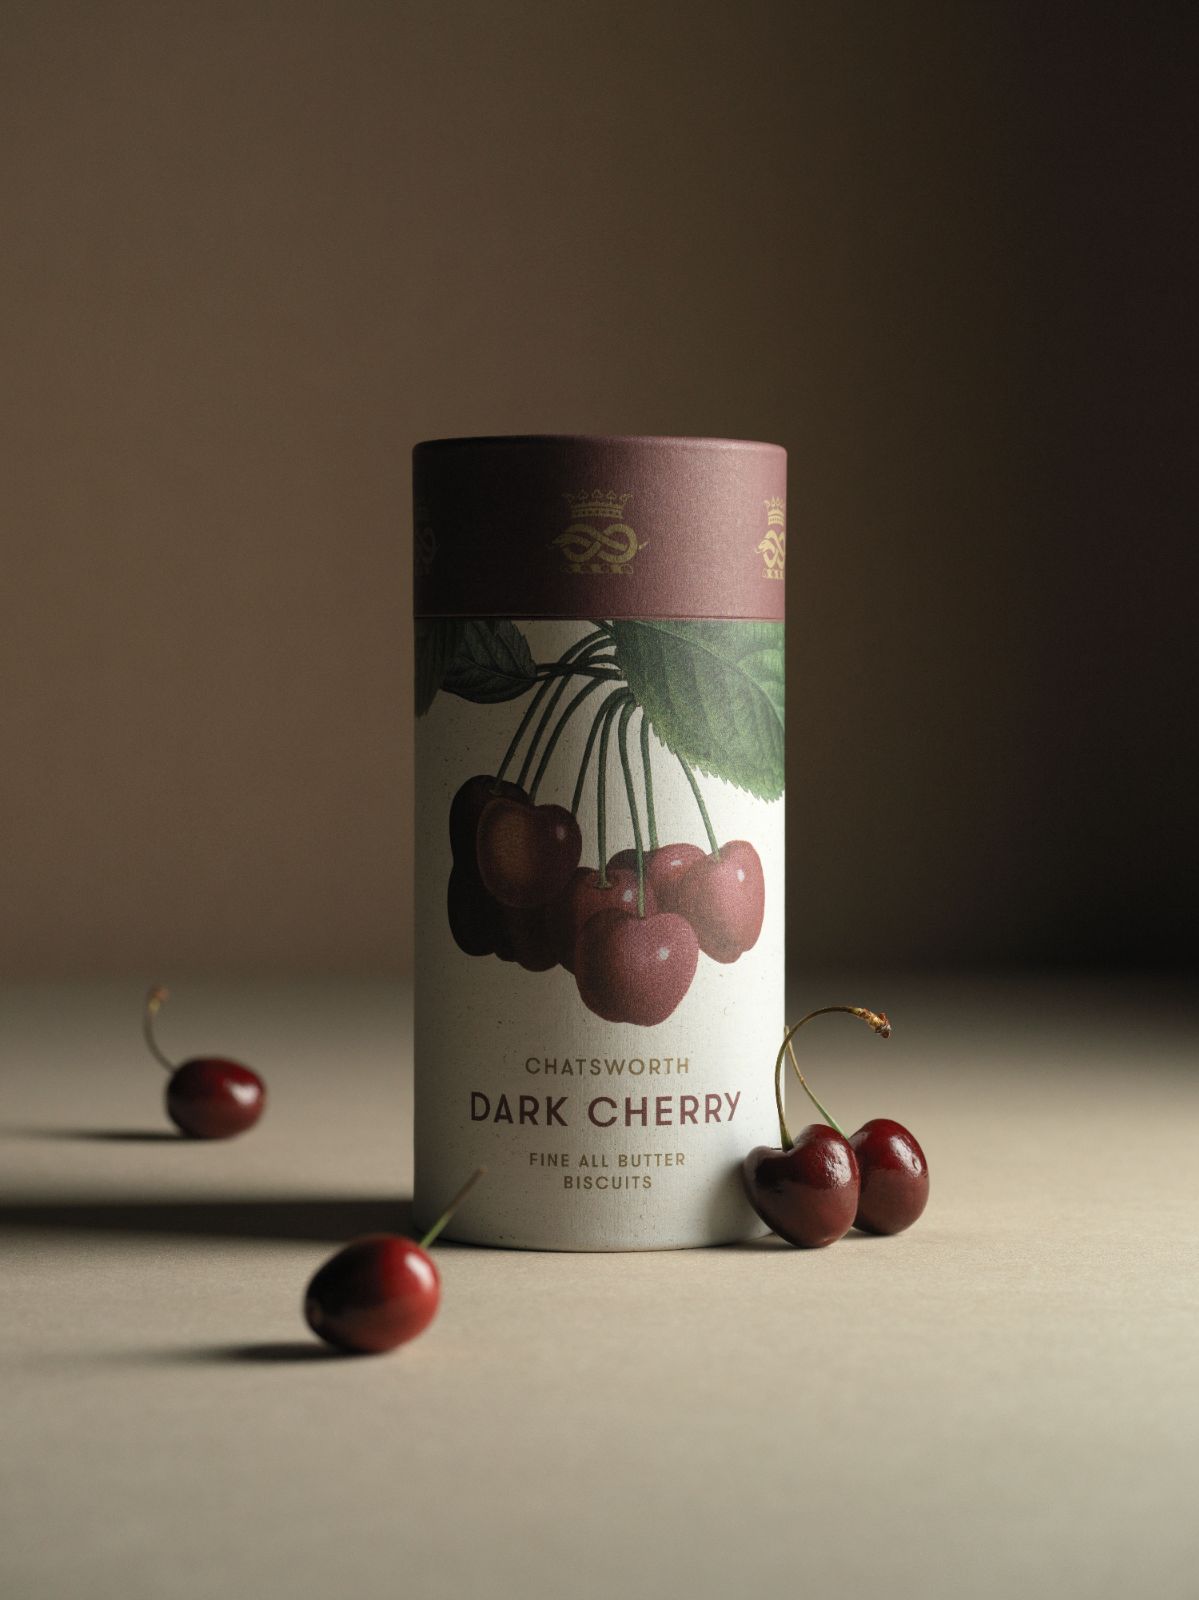 Dark cherry Chatsworth Artisan Biscuits. Vertical packaging with botanical illustrations across the side.